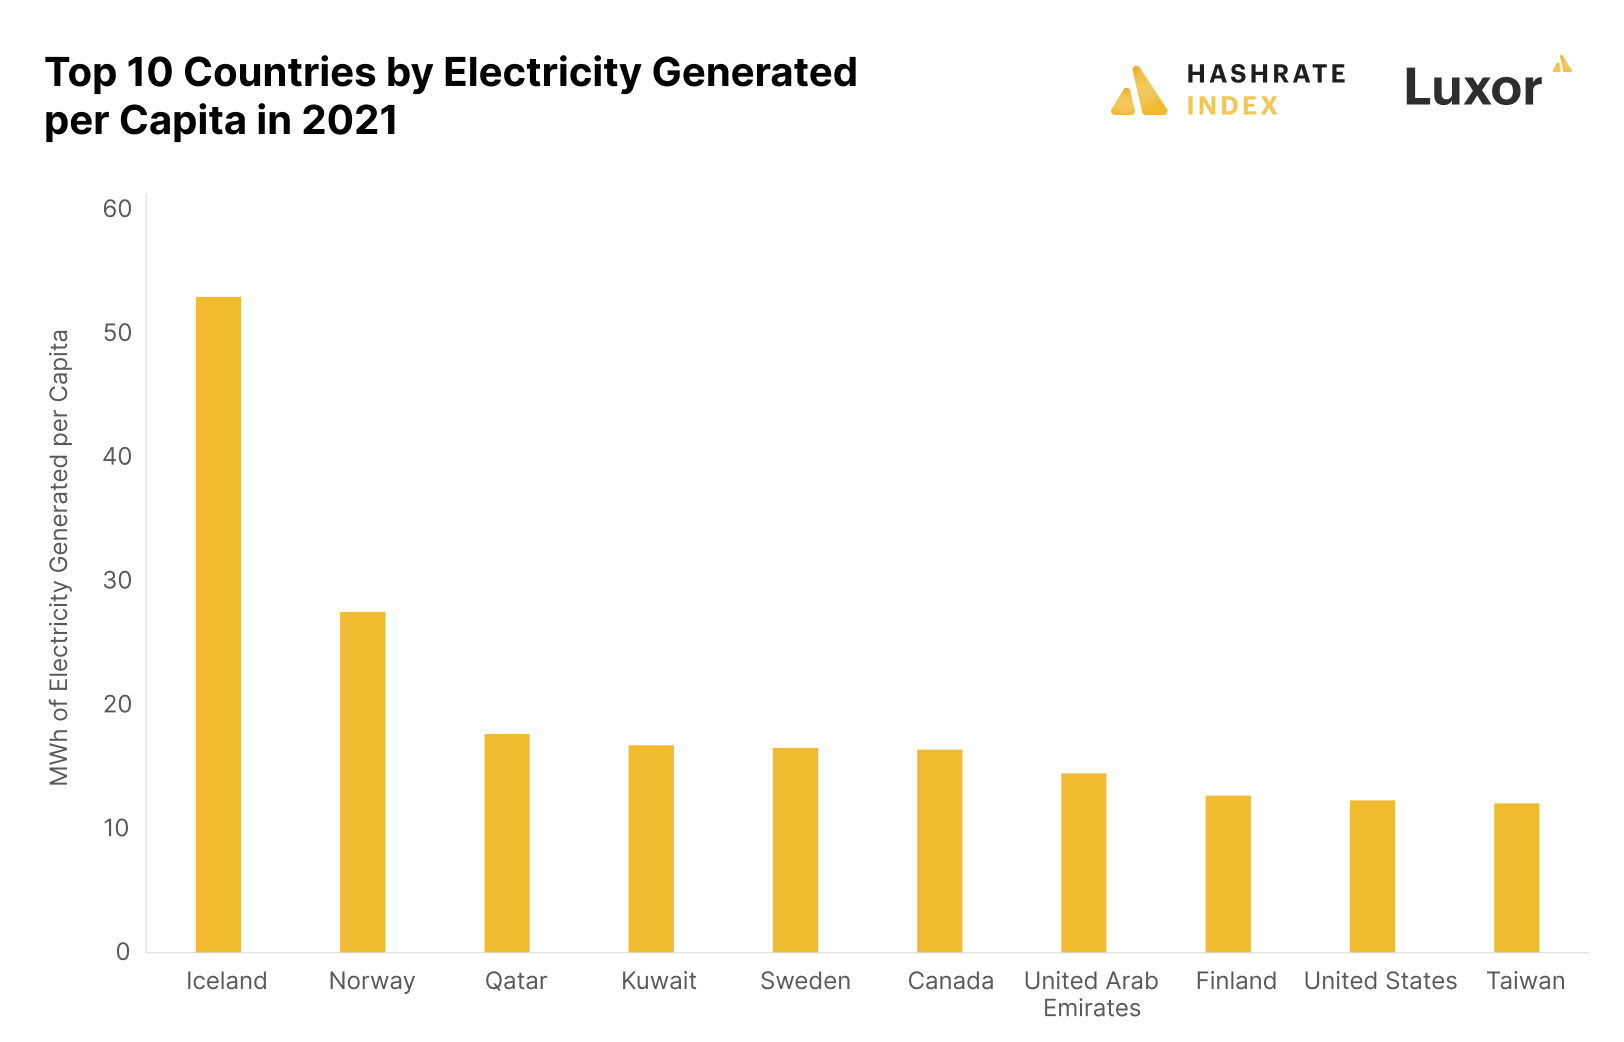 Top 10 countries for electricity generation per capita in 2021